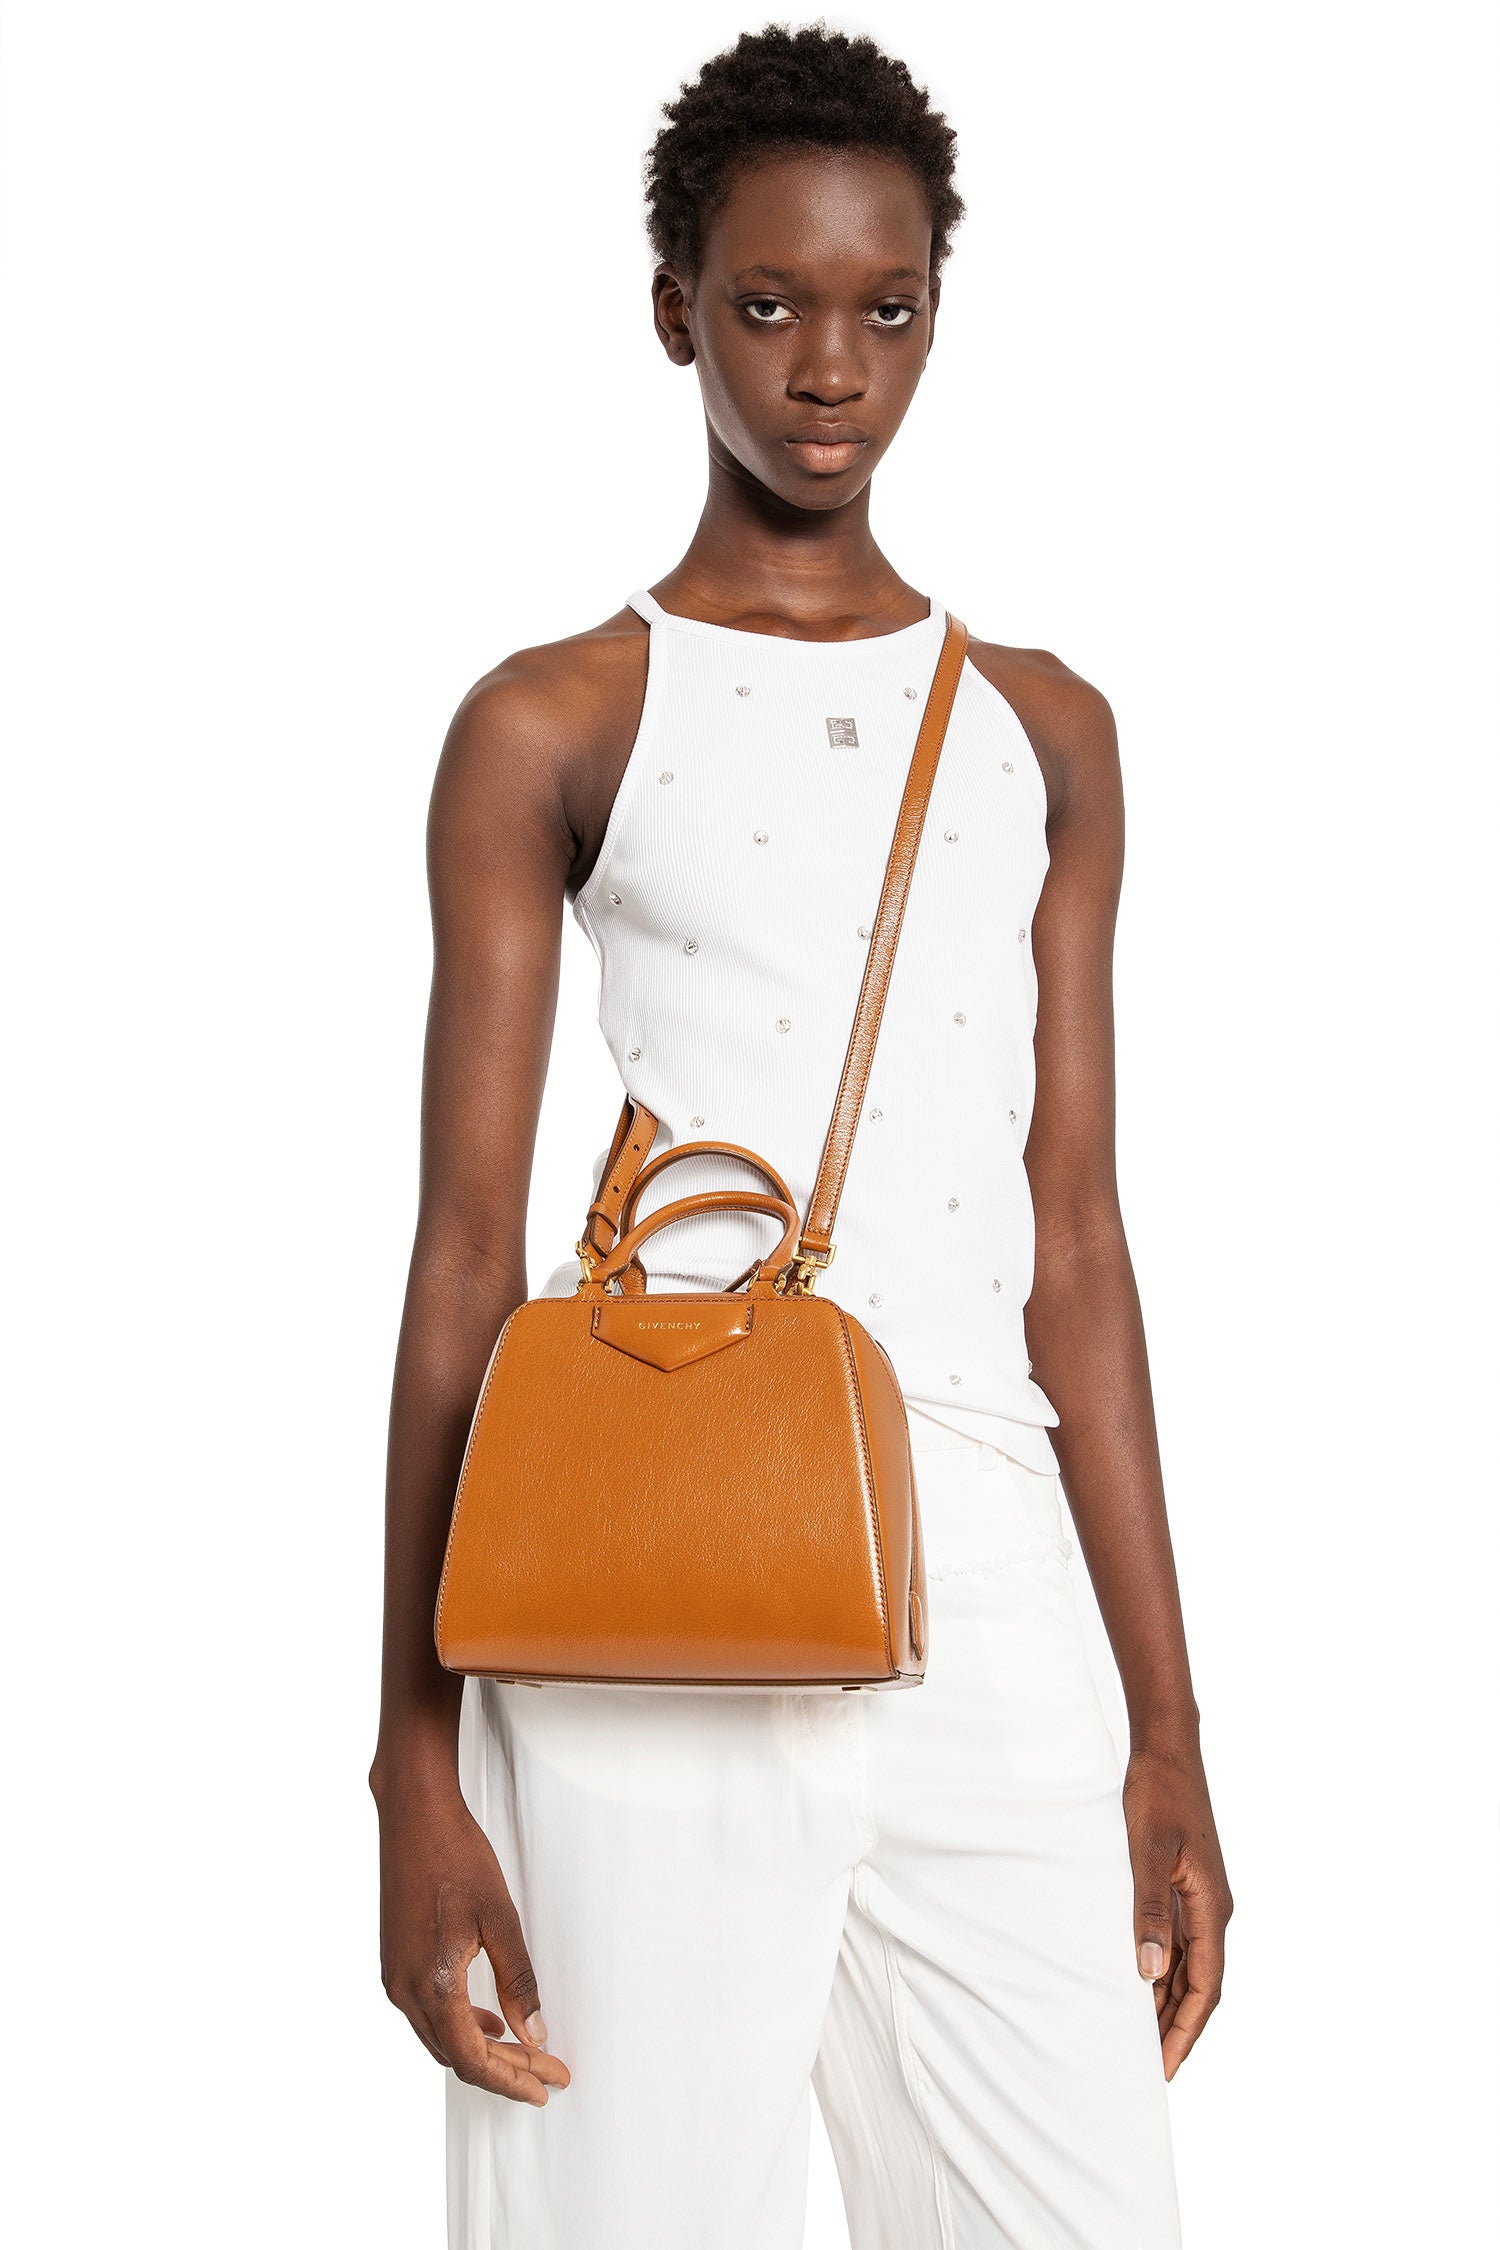 GIVENCHY WOMAN BROWN TOP HANDLE BAGS